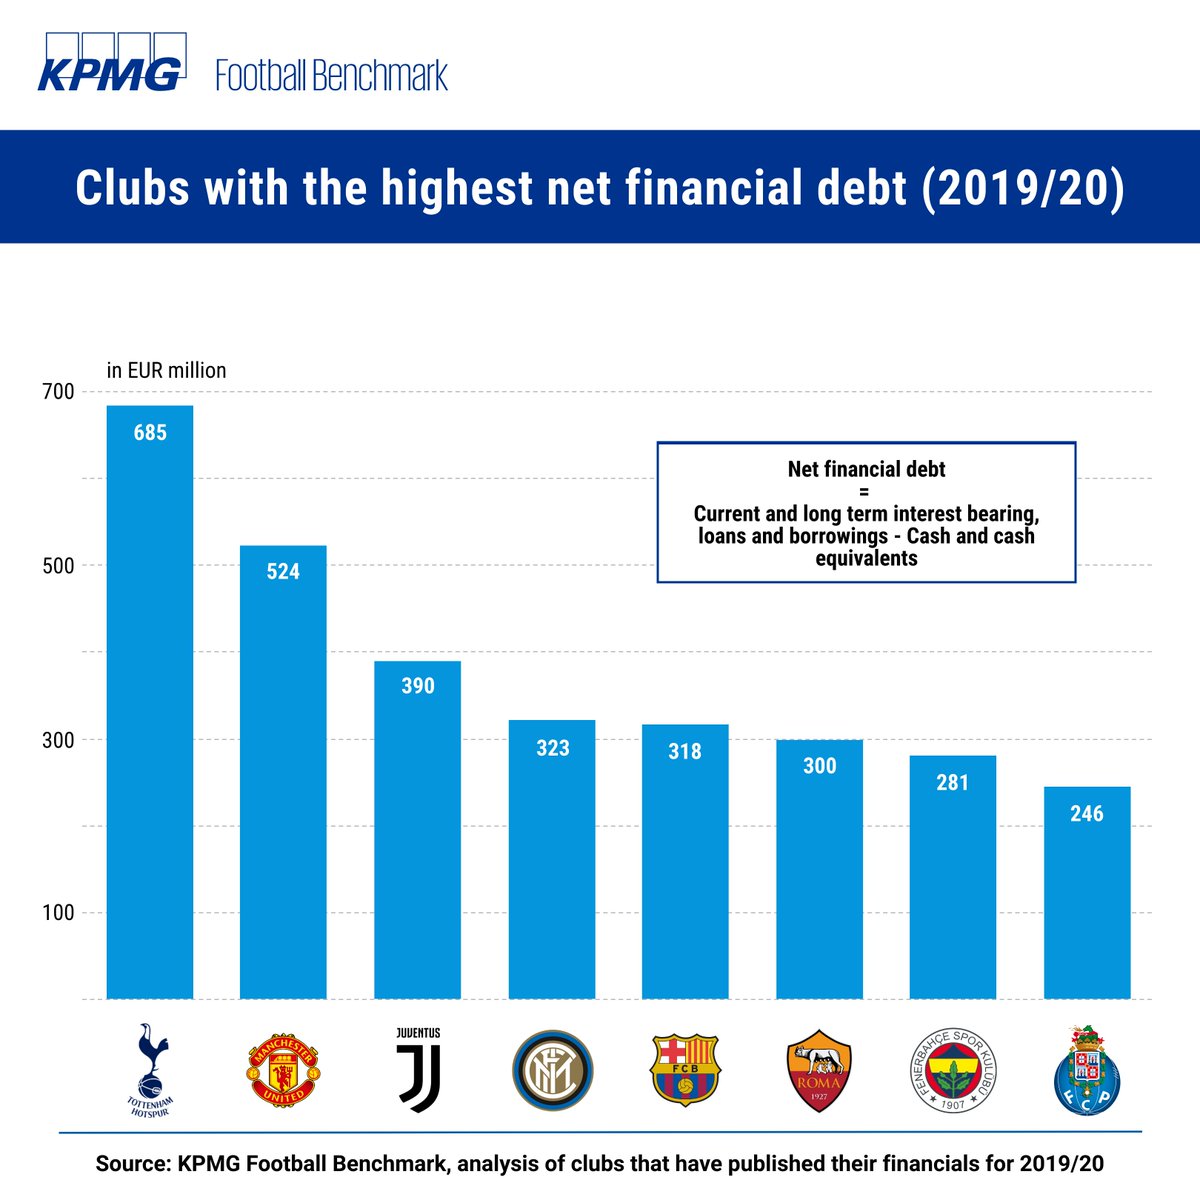 From all clubs that have disclosed their financials for the 2019/20 FY, Tottenham Hotspur show the highest net financial debt (EUR 685m). The resources received by the Spurs were mainly used for the construction of their new stadium.
#KPMGFBM https://t.co/MUpOaa3IJ7